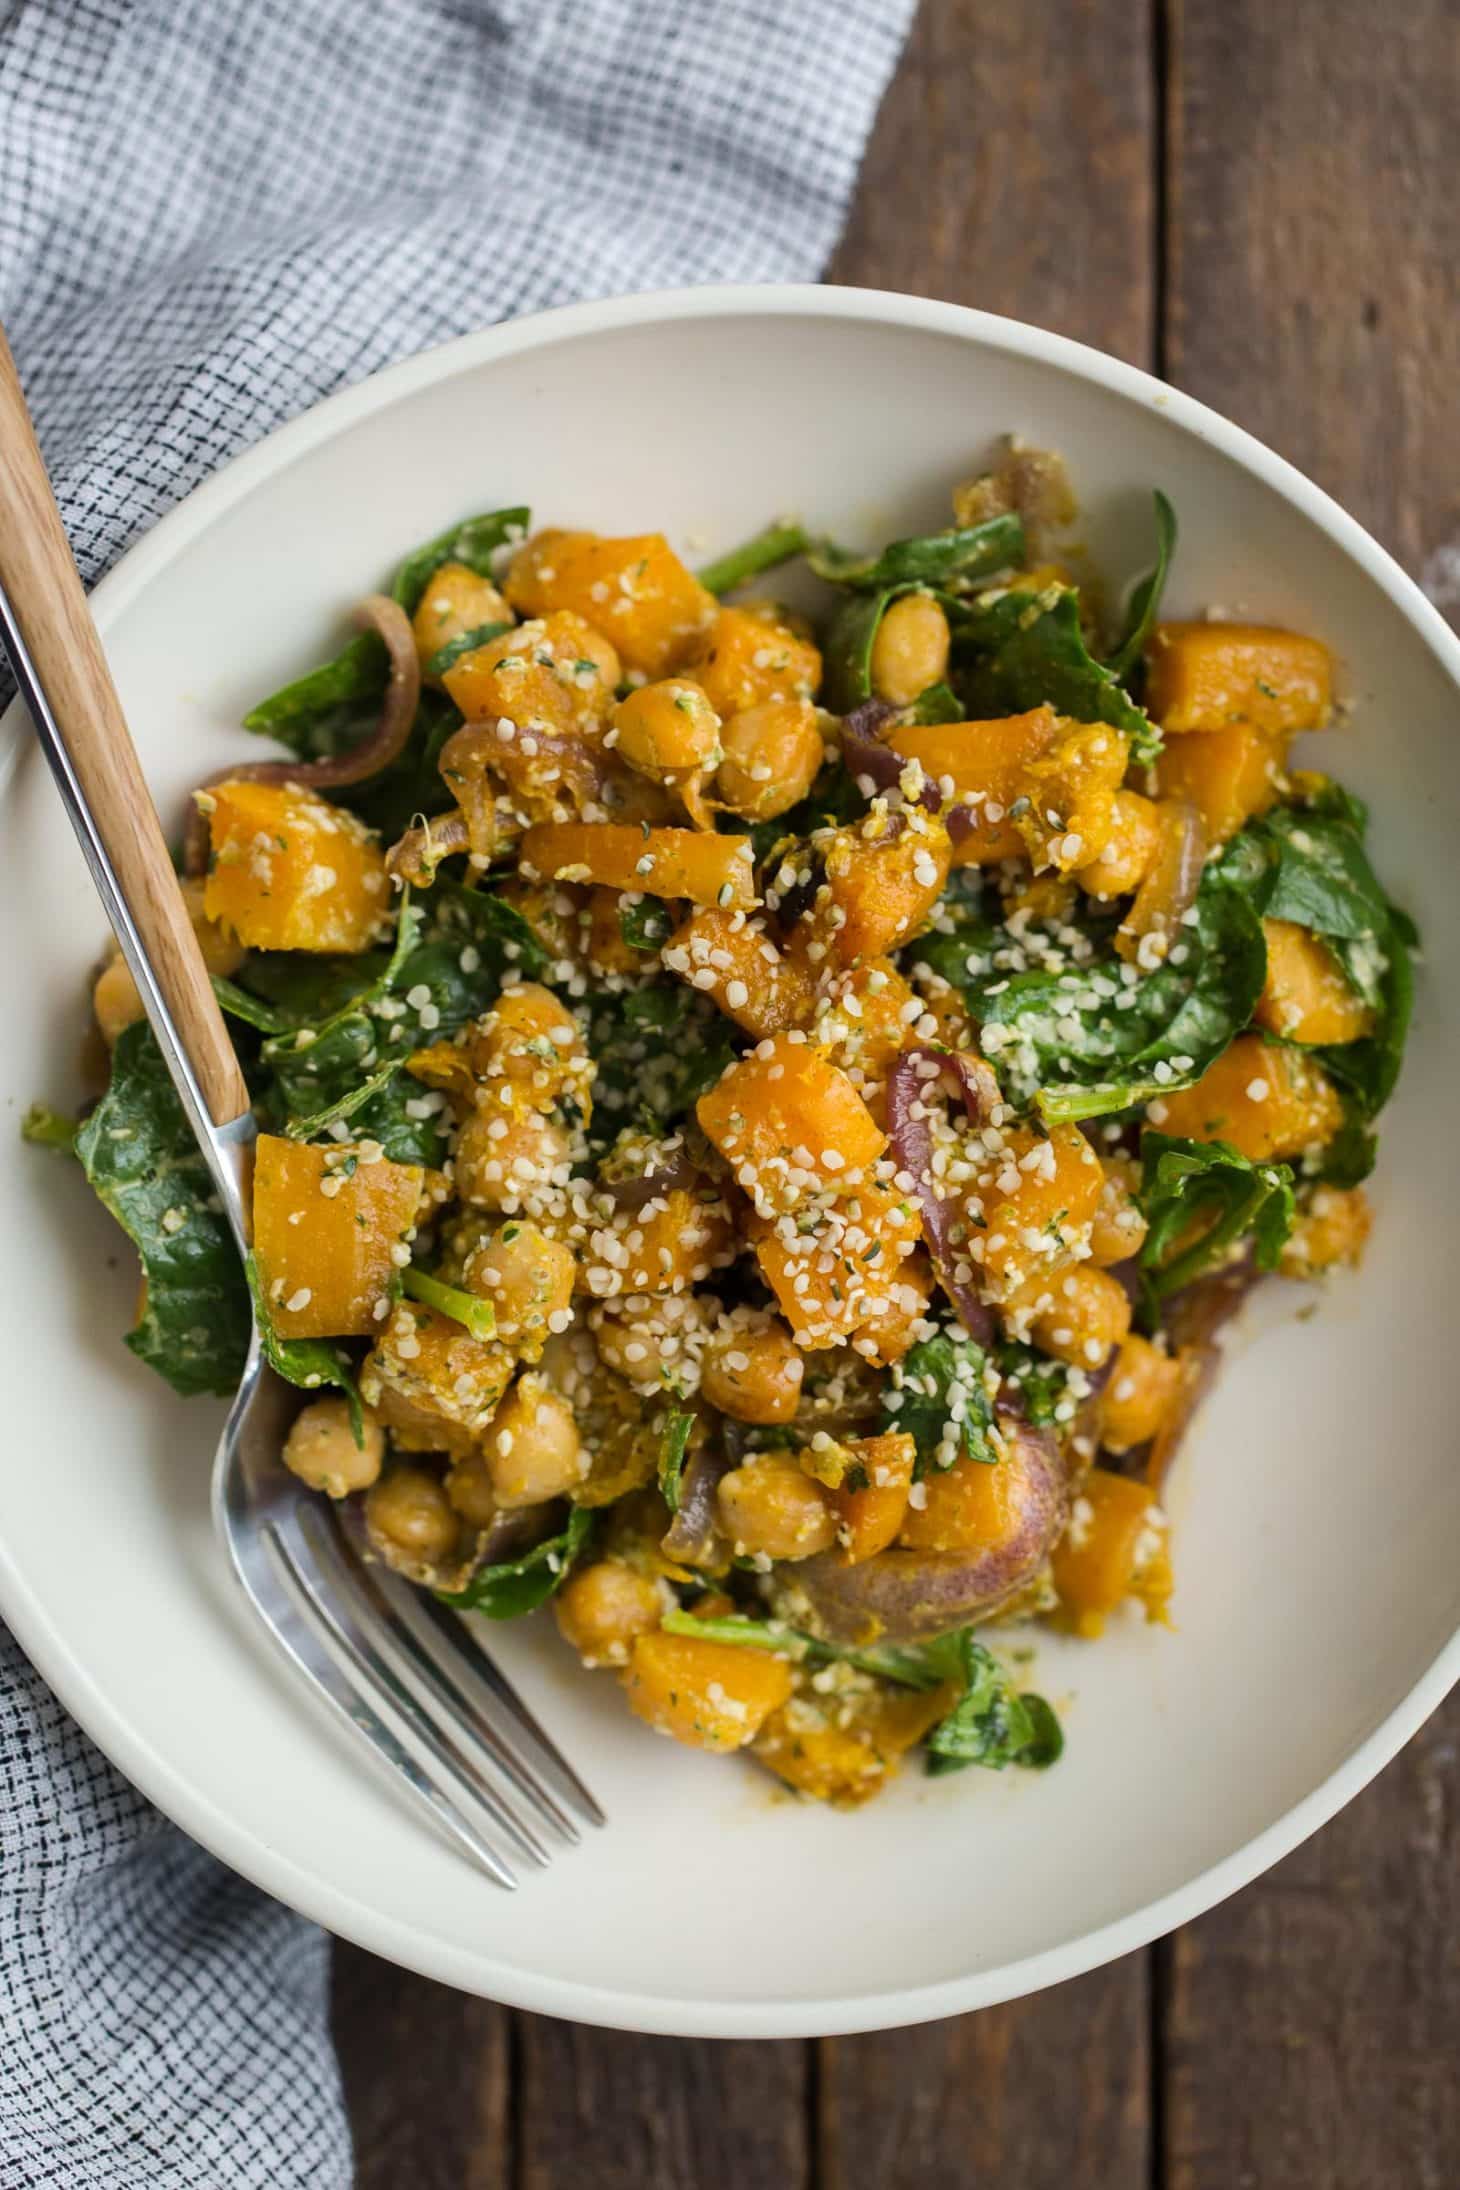 Chipotle Roasted Butternut Squash Salad with Hemp Dressing